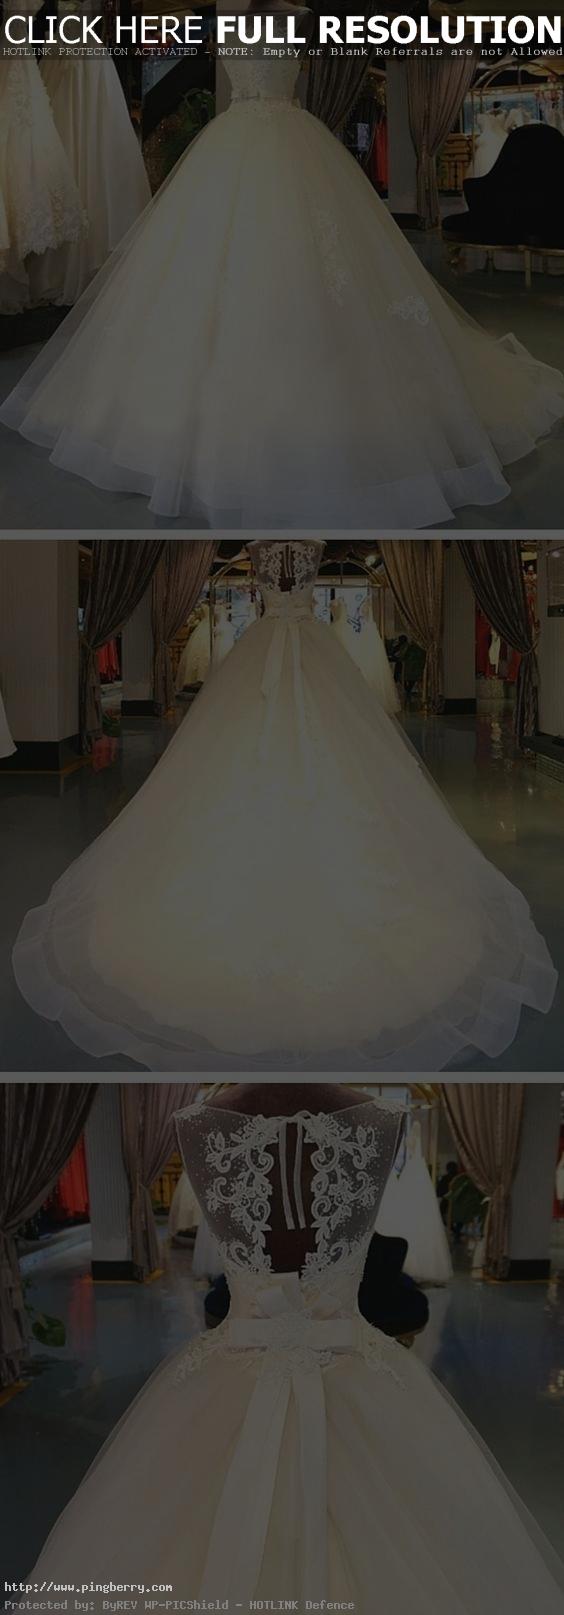 Princess Ball Gown White Tulle Skirt Lace Bodice Wedding Gowns Wedding Dresses U...